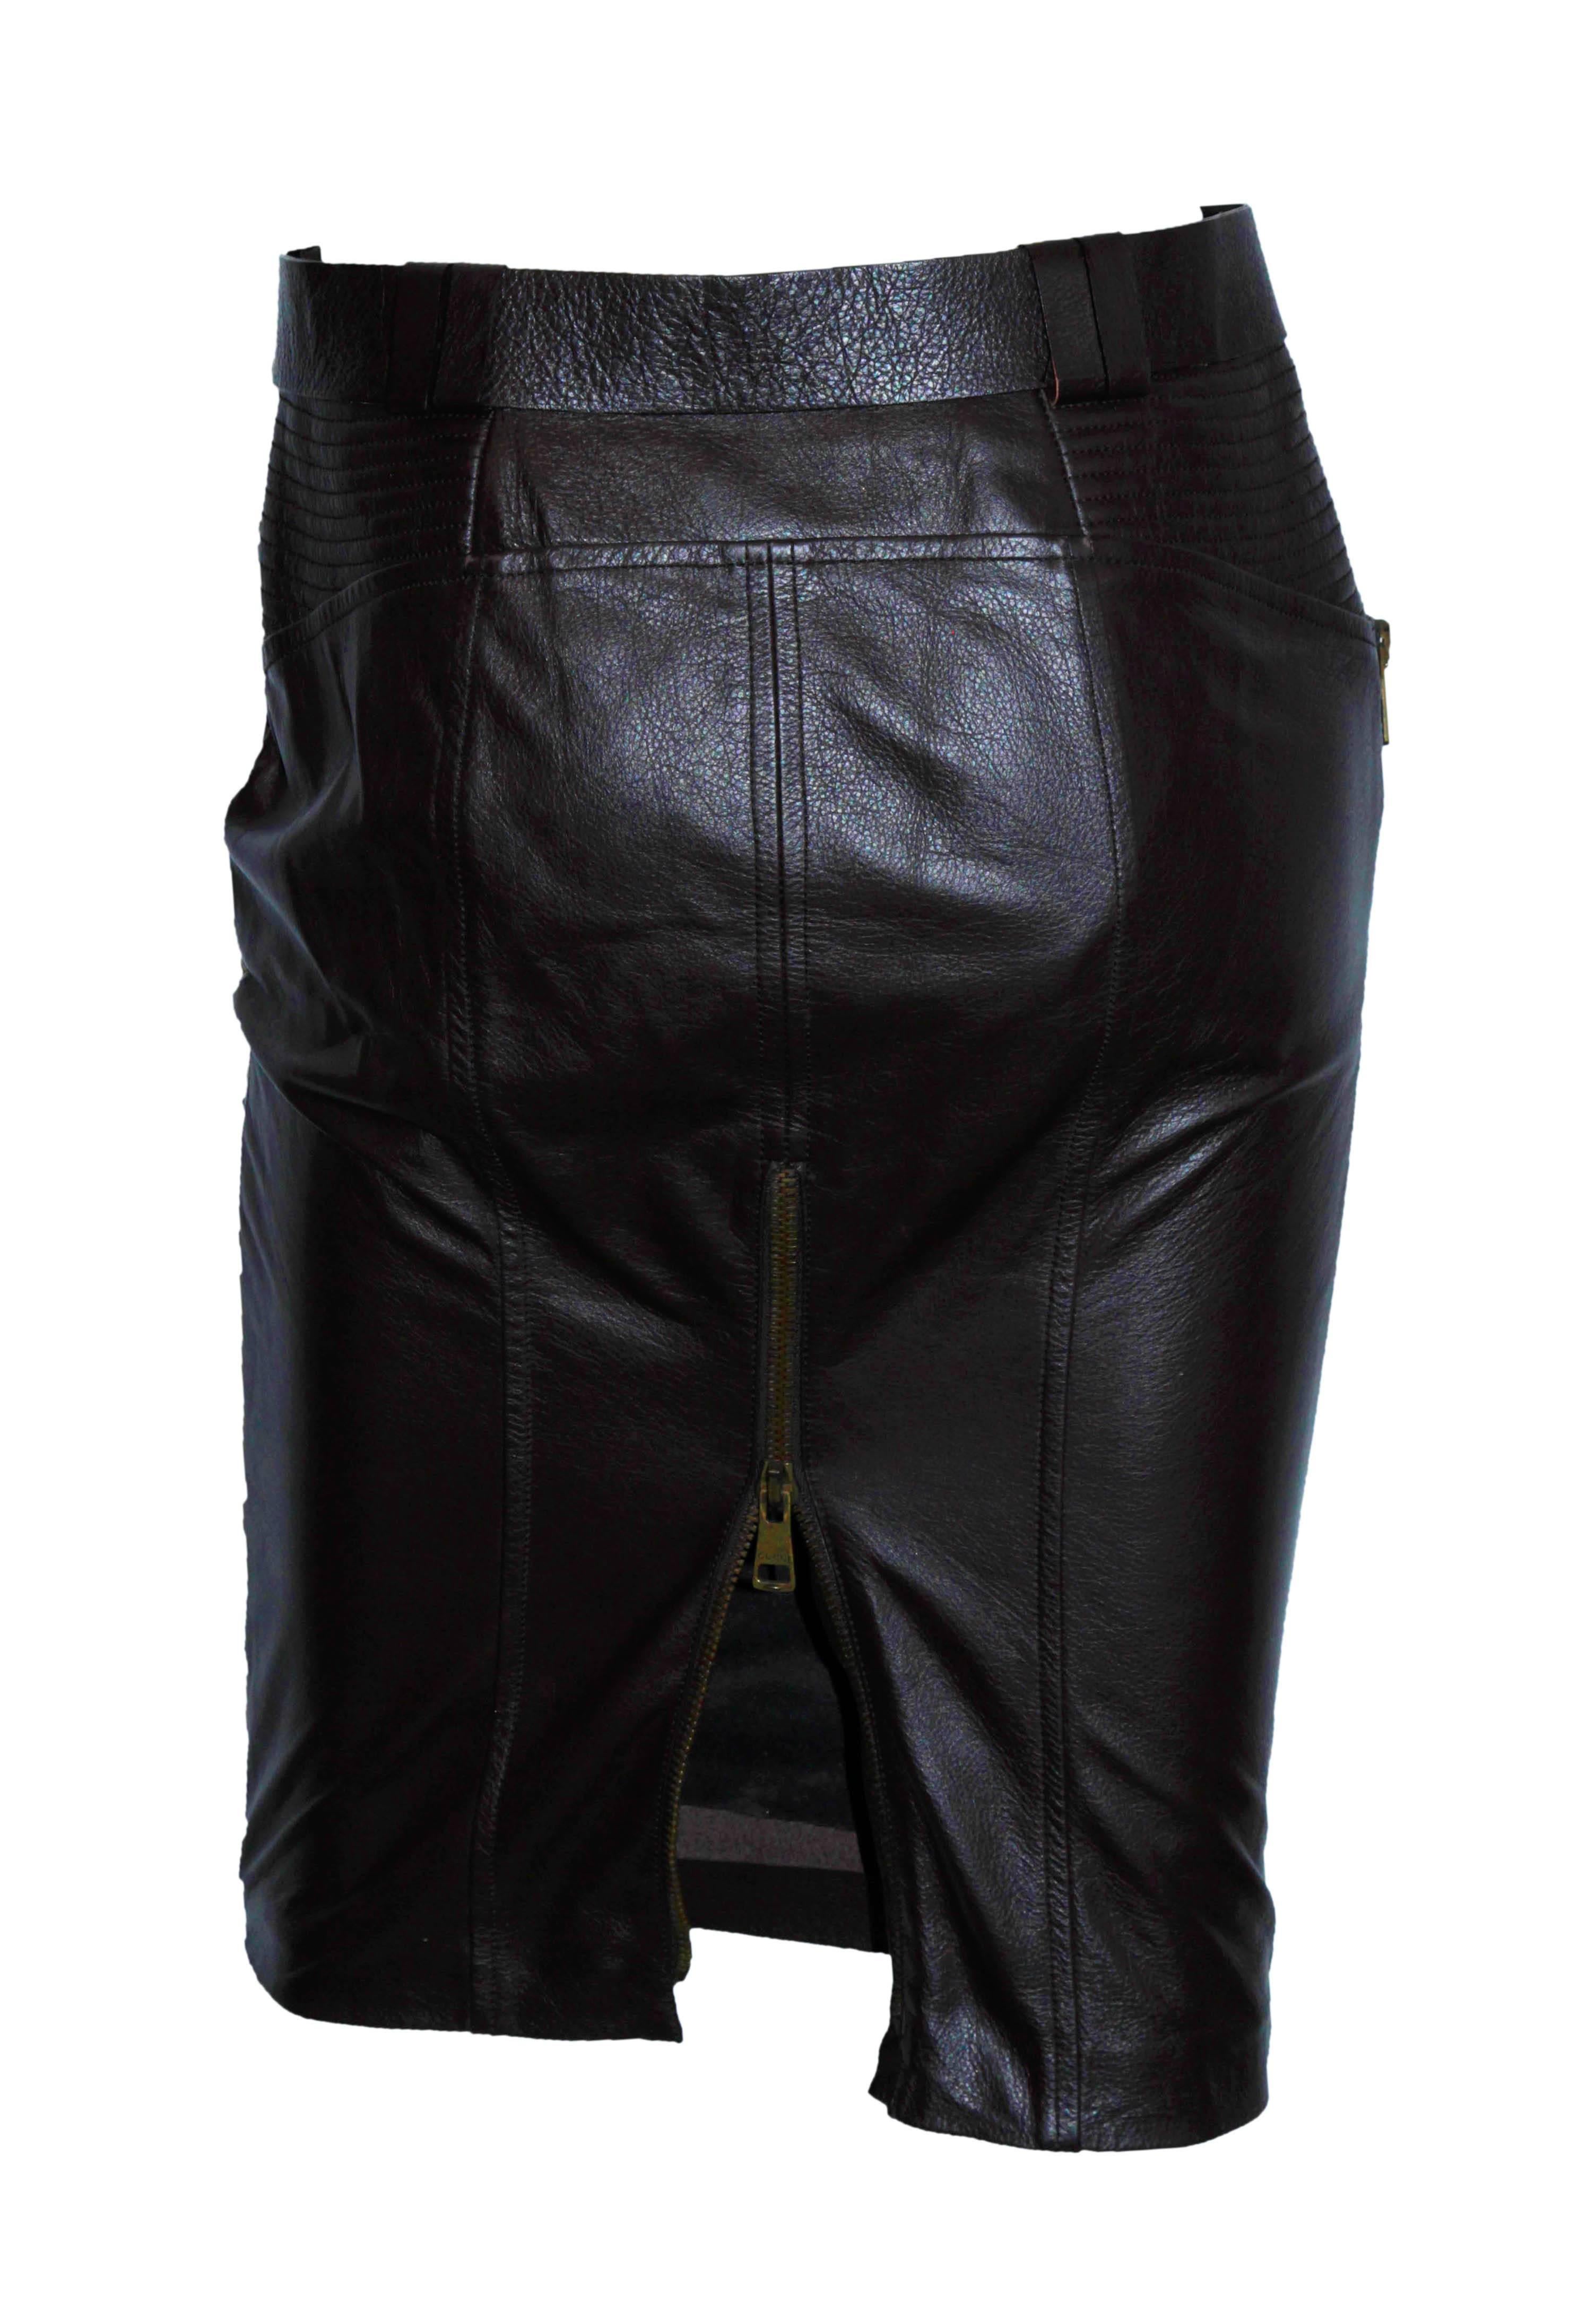 Gorgeous Tom Ford For Gucci Fall/Winter 2003 Chocolate Brown Corseted Leather Skirt & Belt!

This gorgeous skirt is an italian size 40 & fits a US size 4 beautifully. This skirt is in lovely condition with barely any sign of wear, & is